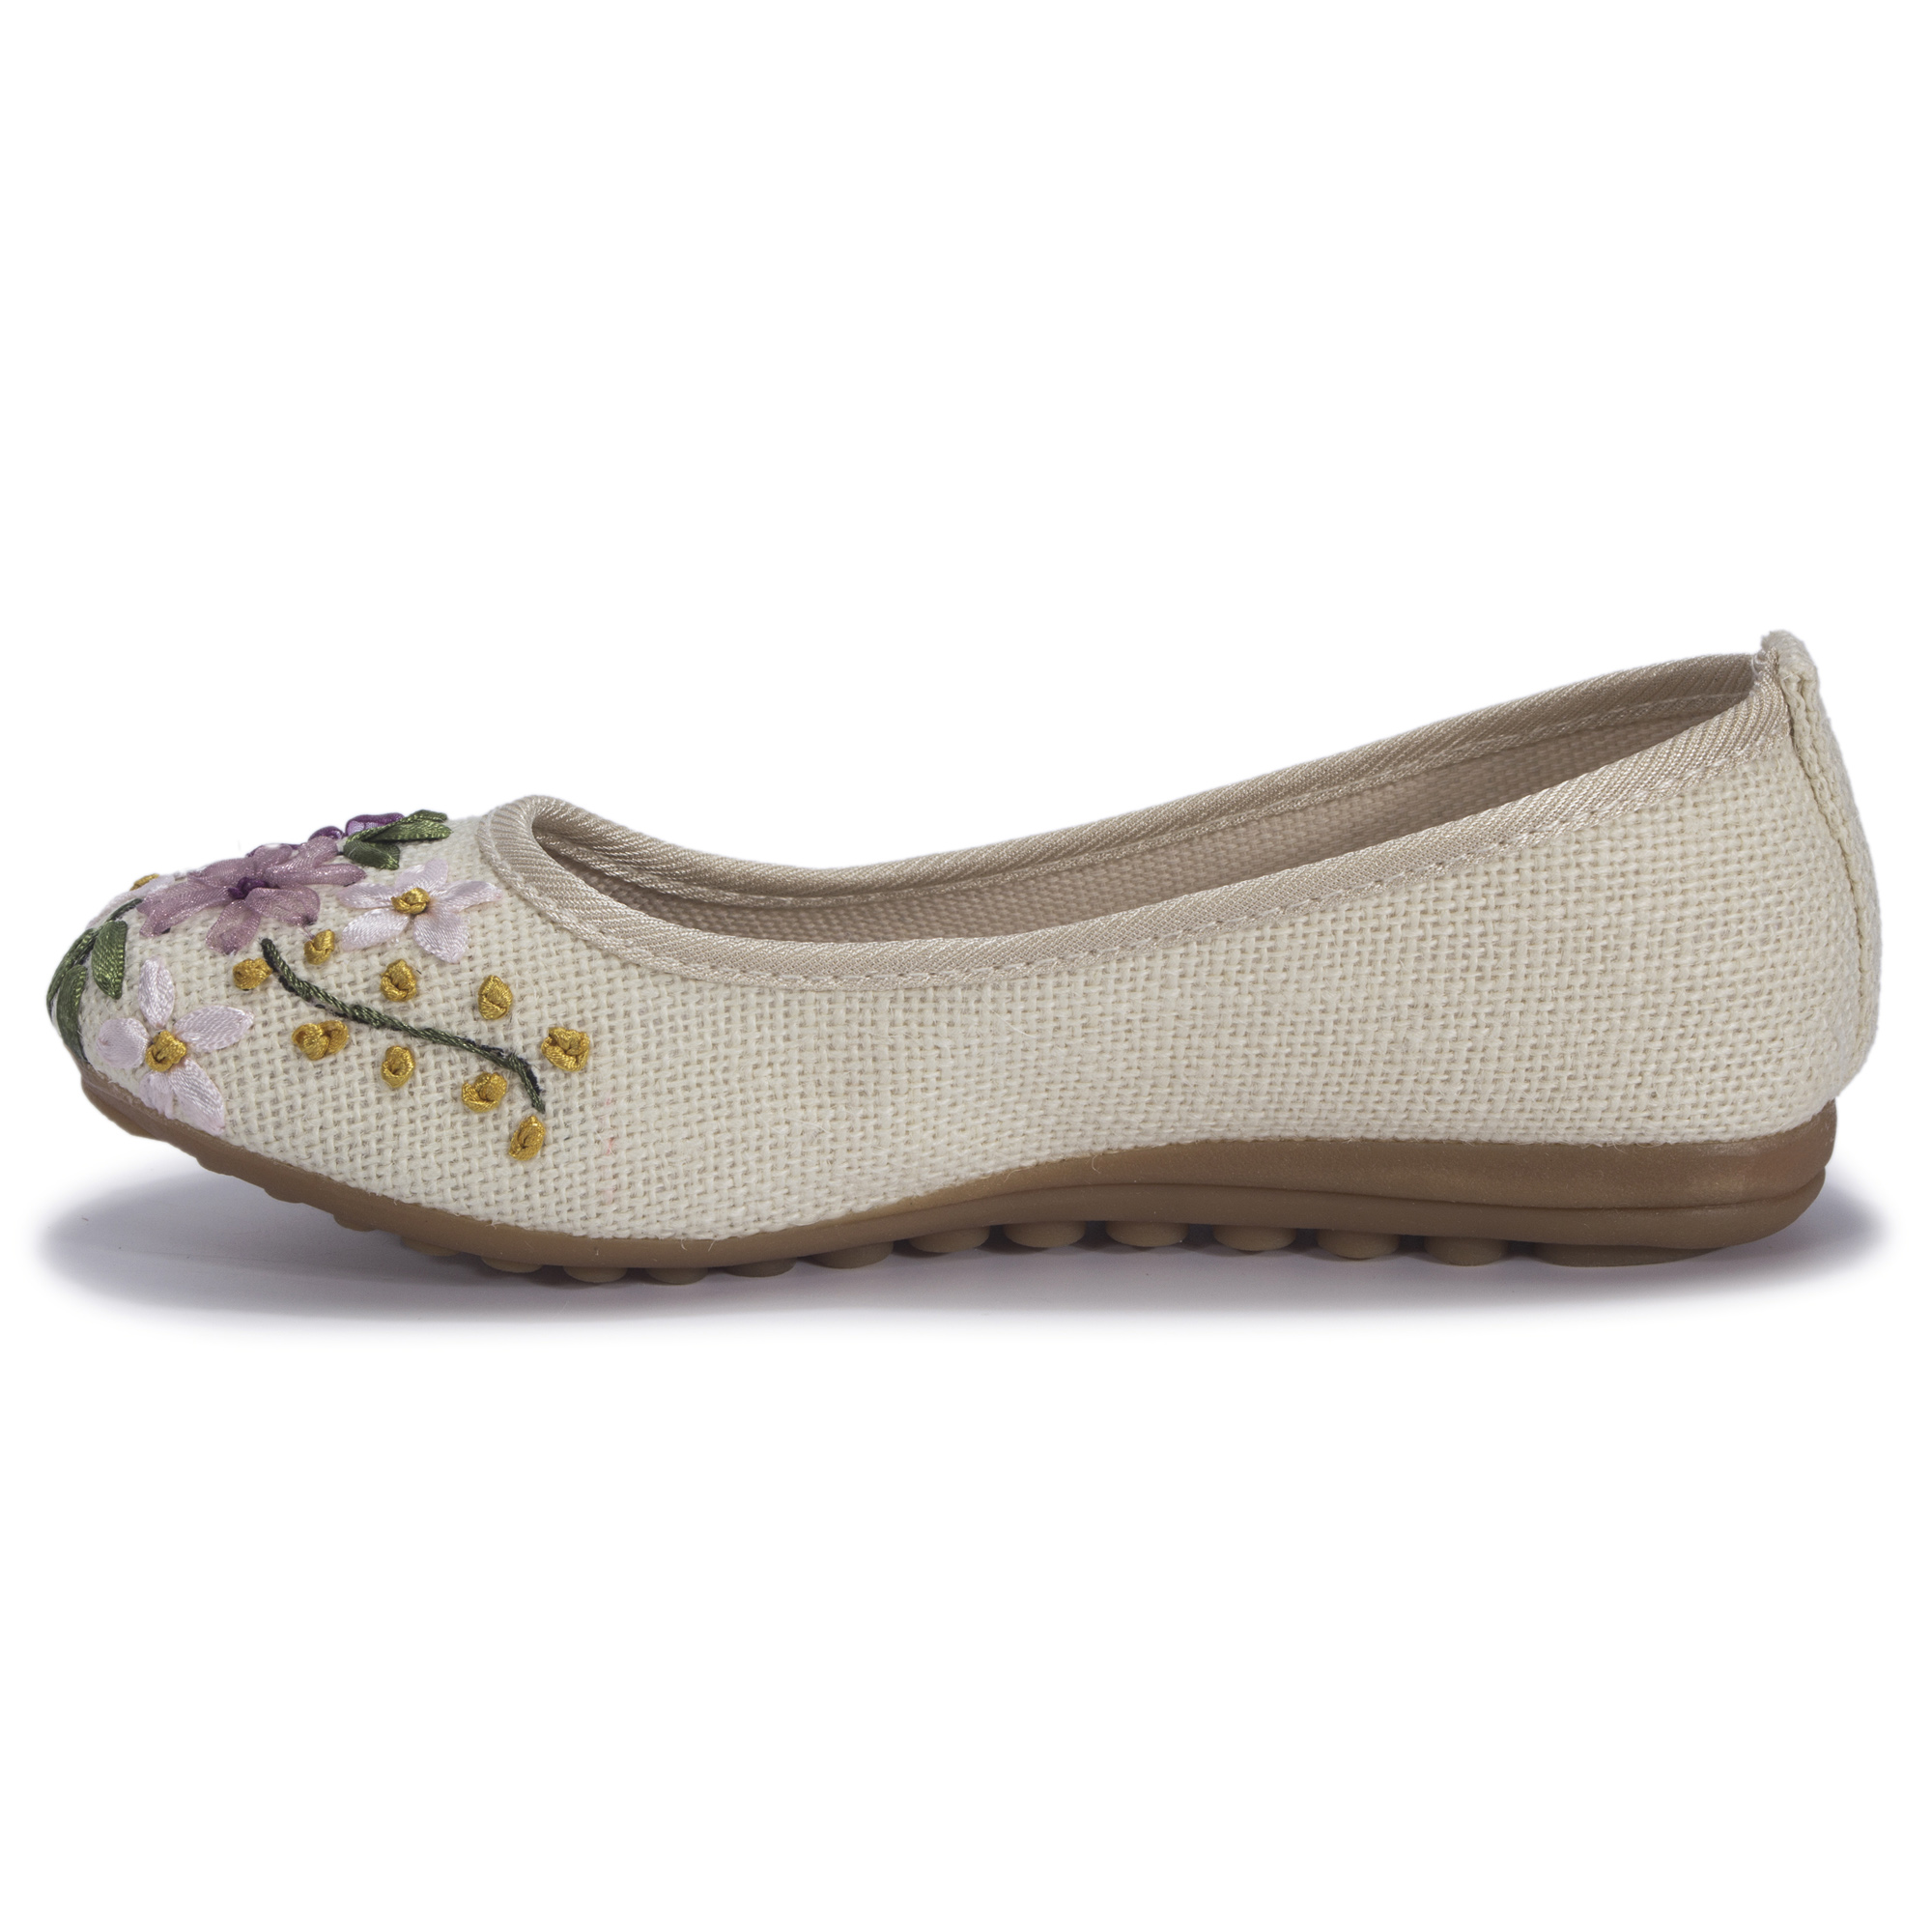 DODOING Womens Ballet Flats Floral Embroidered Cut Platform Shoe Slip On Casual Driving Loafers, Khaki/ White/ Navy Blue, 4-10 Size - image 5 of 7